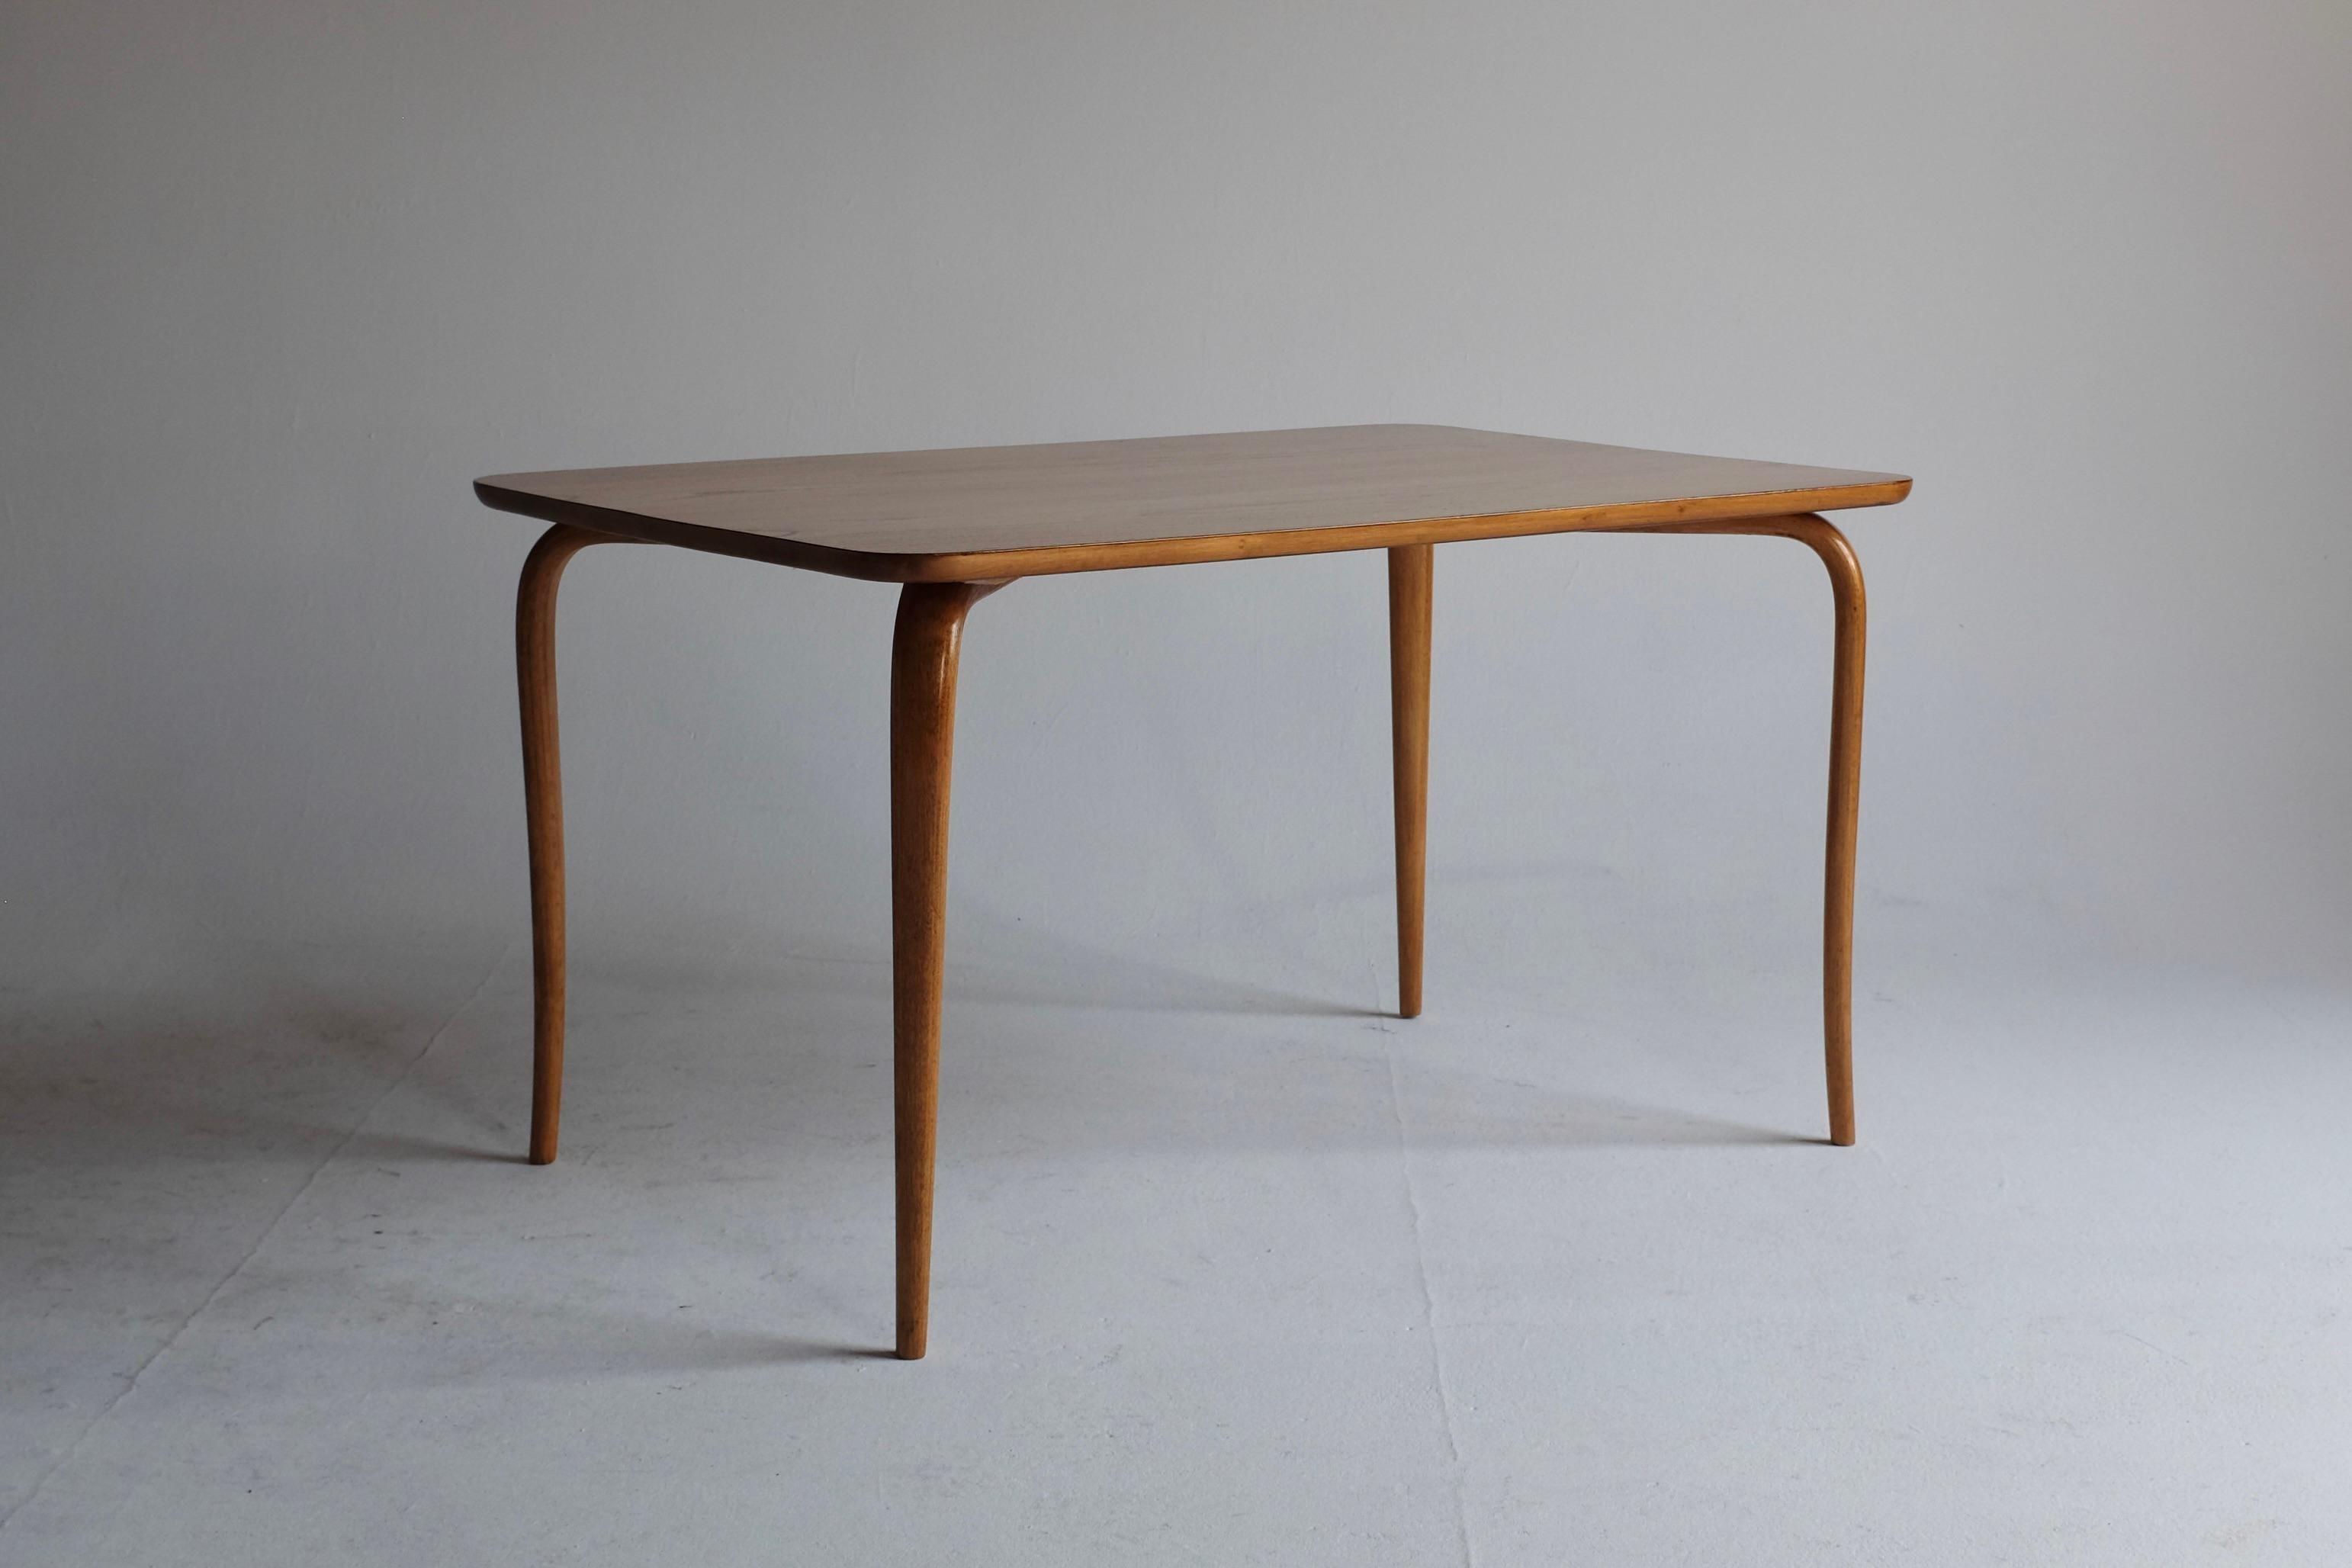 1950s Side table by Bruno Mathsson for Firma Karl Mathsson, Värnamo, Sweden. Designed in 1942 the table have the signature curvy legs that also features in many of Bruno Mathsson designs. The table is made out of birch with a beautiful pattern of